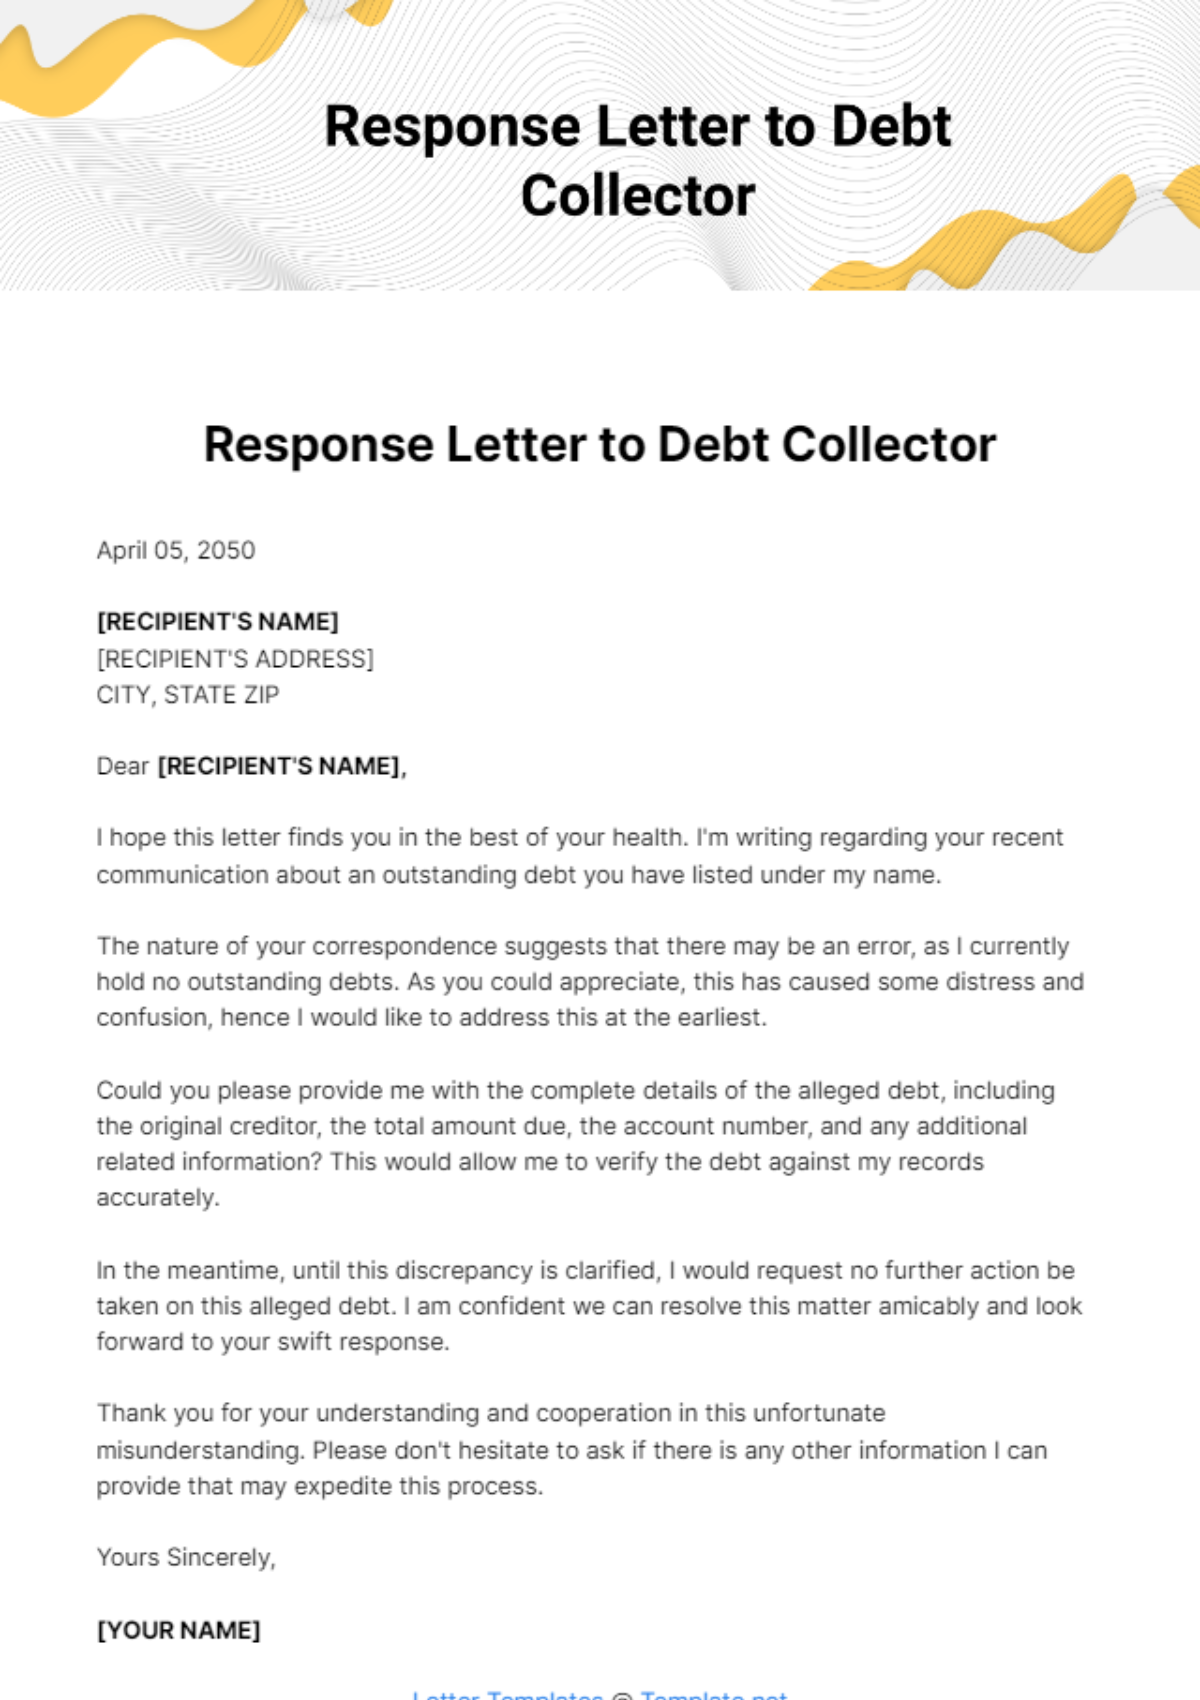 Free Response Letter to Debt Collector Template